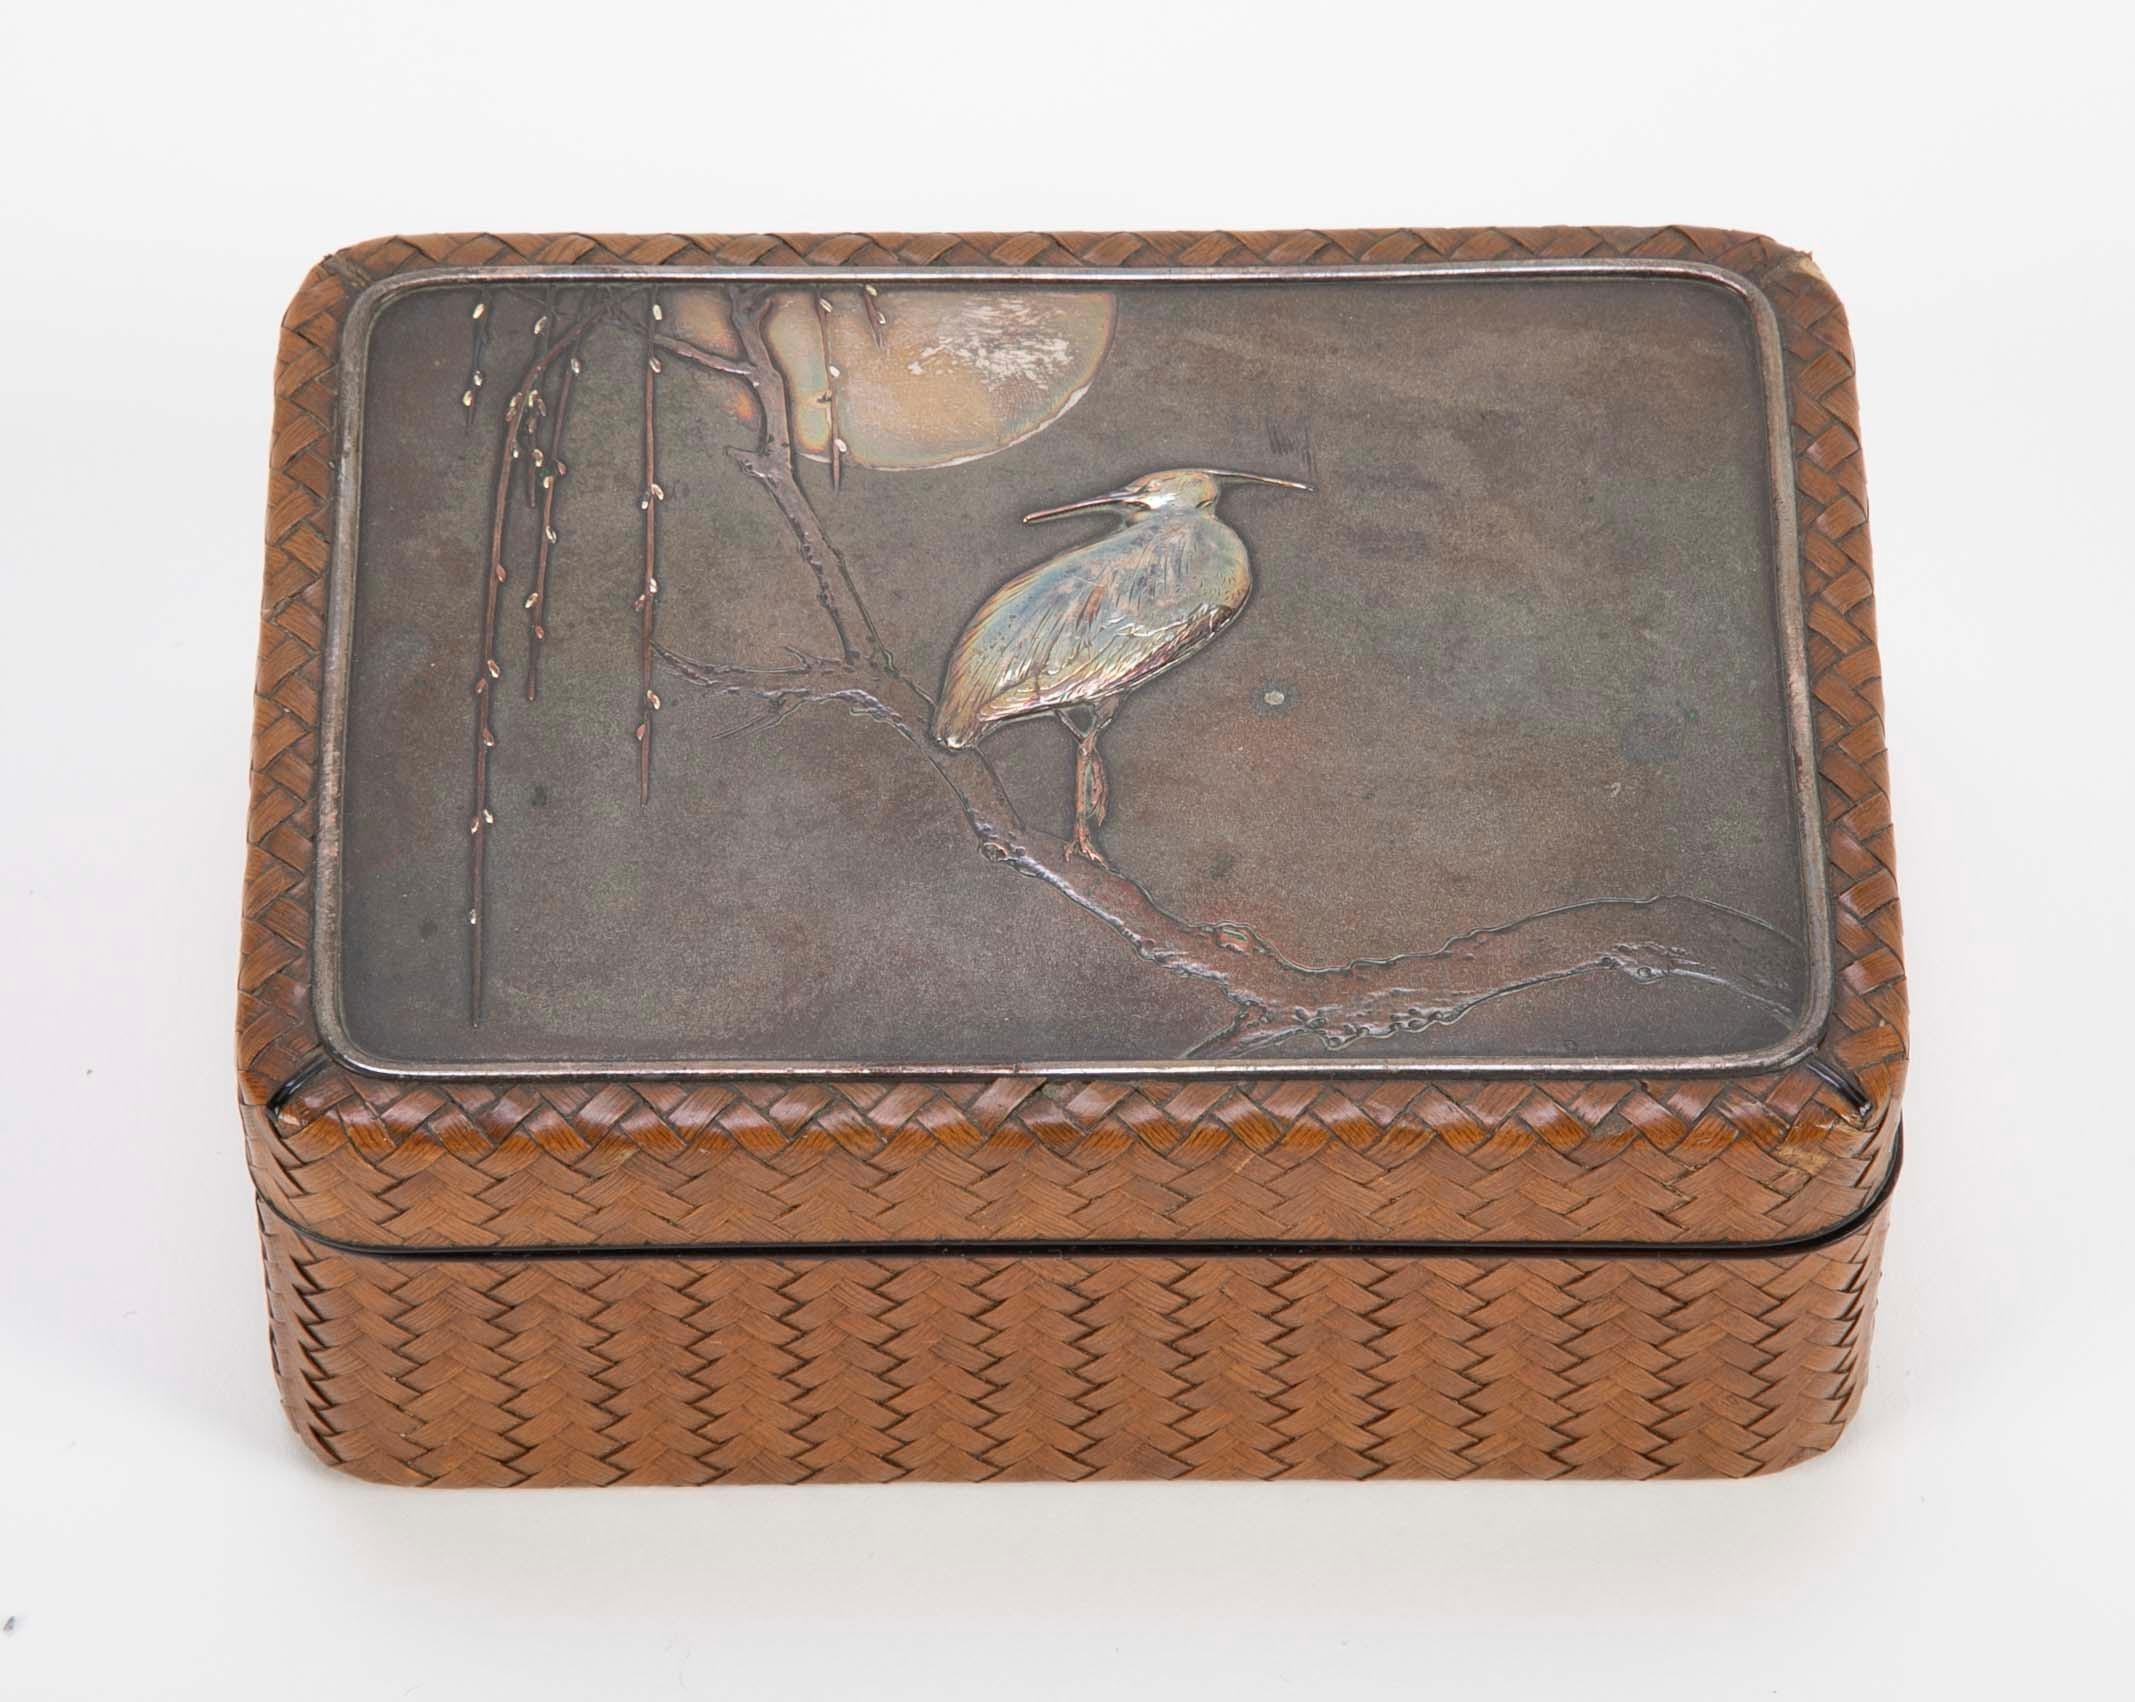 Japanese Meiji Period box of woven cane, lacquer, silver & copper depicting an egret on a branch under the moon on the lid. circa 1868-1912.